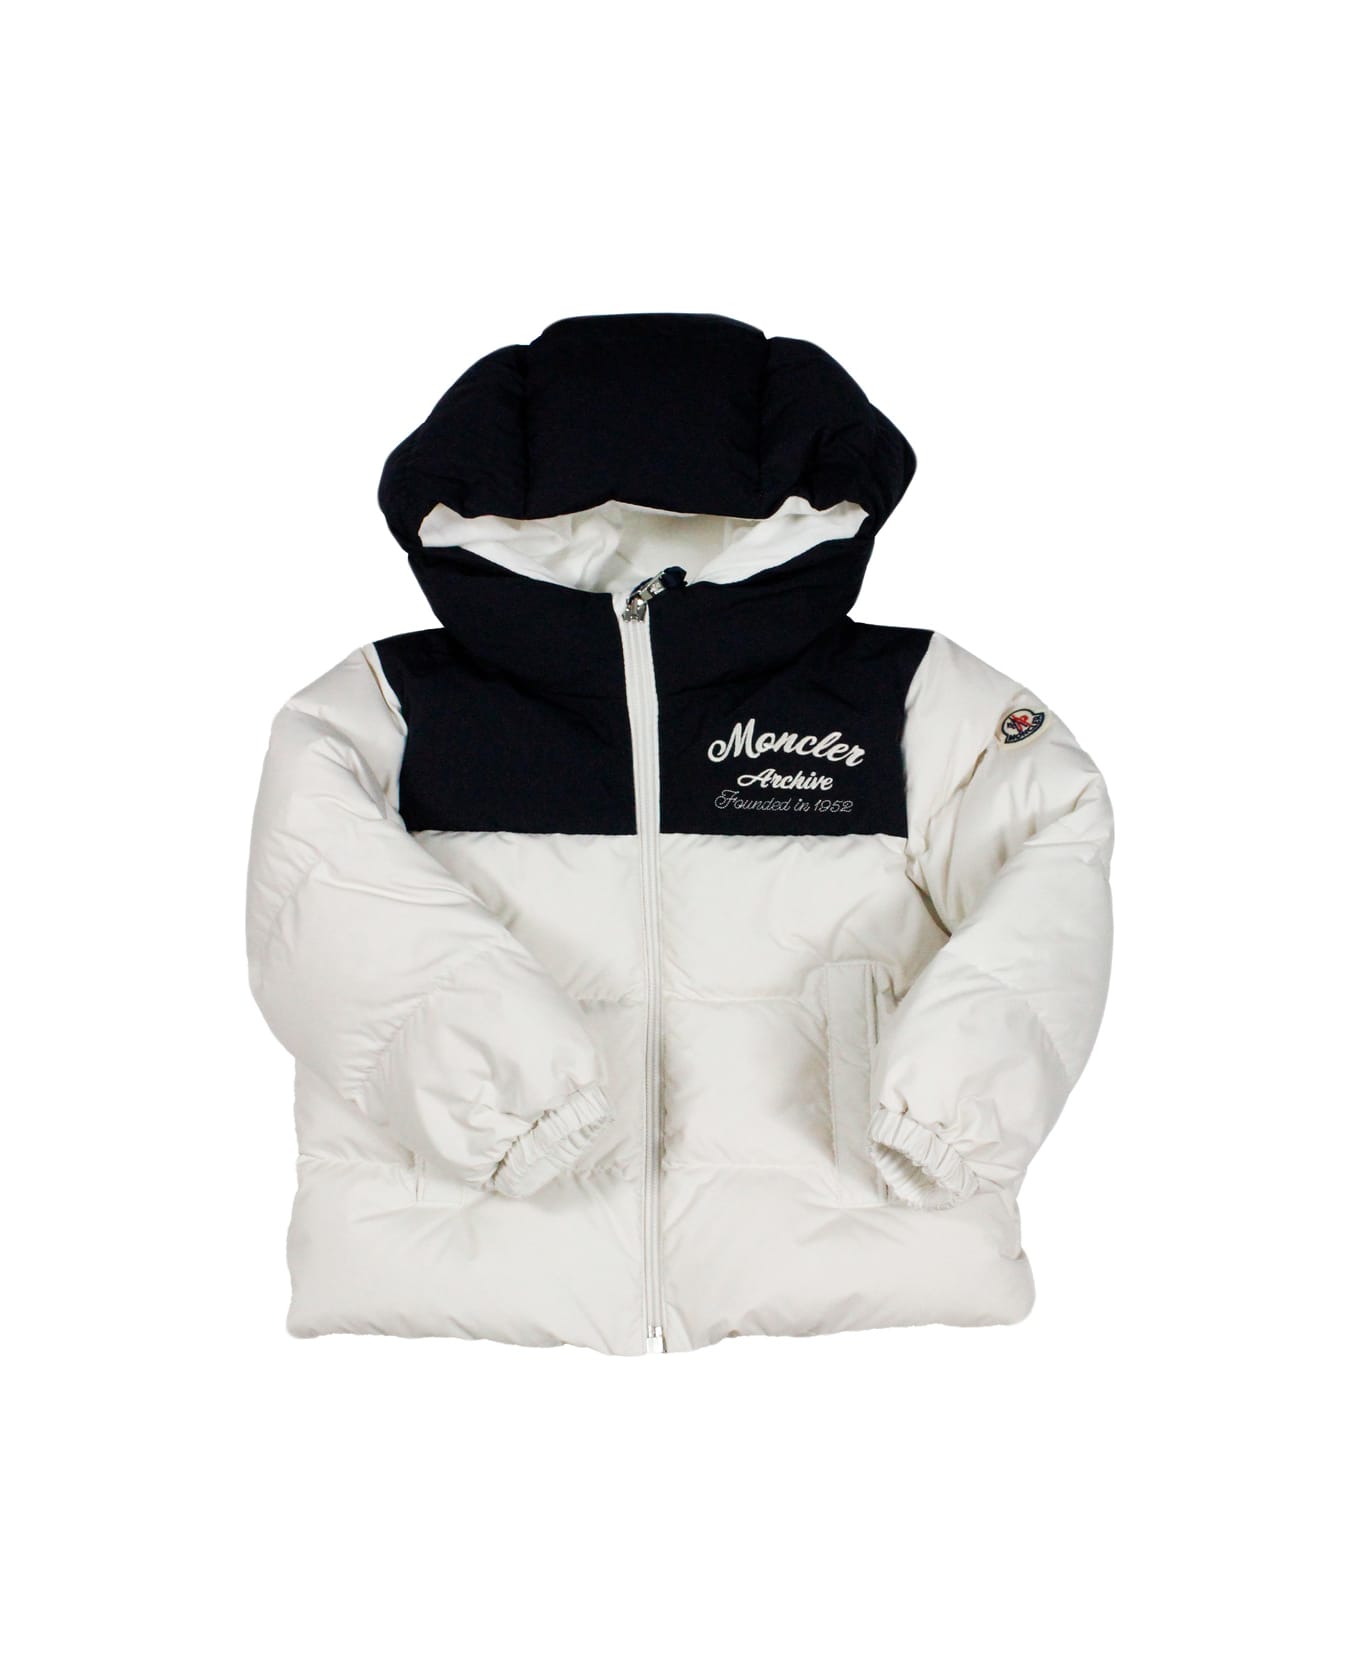 Moncler Joe Down Jacket Padded In Real Two-tone White And Blue Goose Down With Hood And Zip Closure Welt Pockets On The Front - White